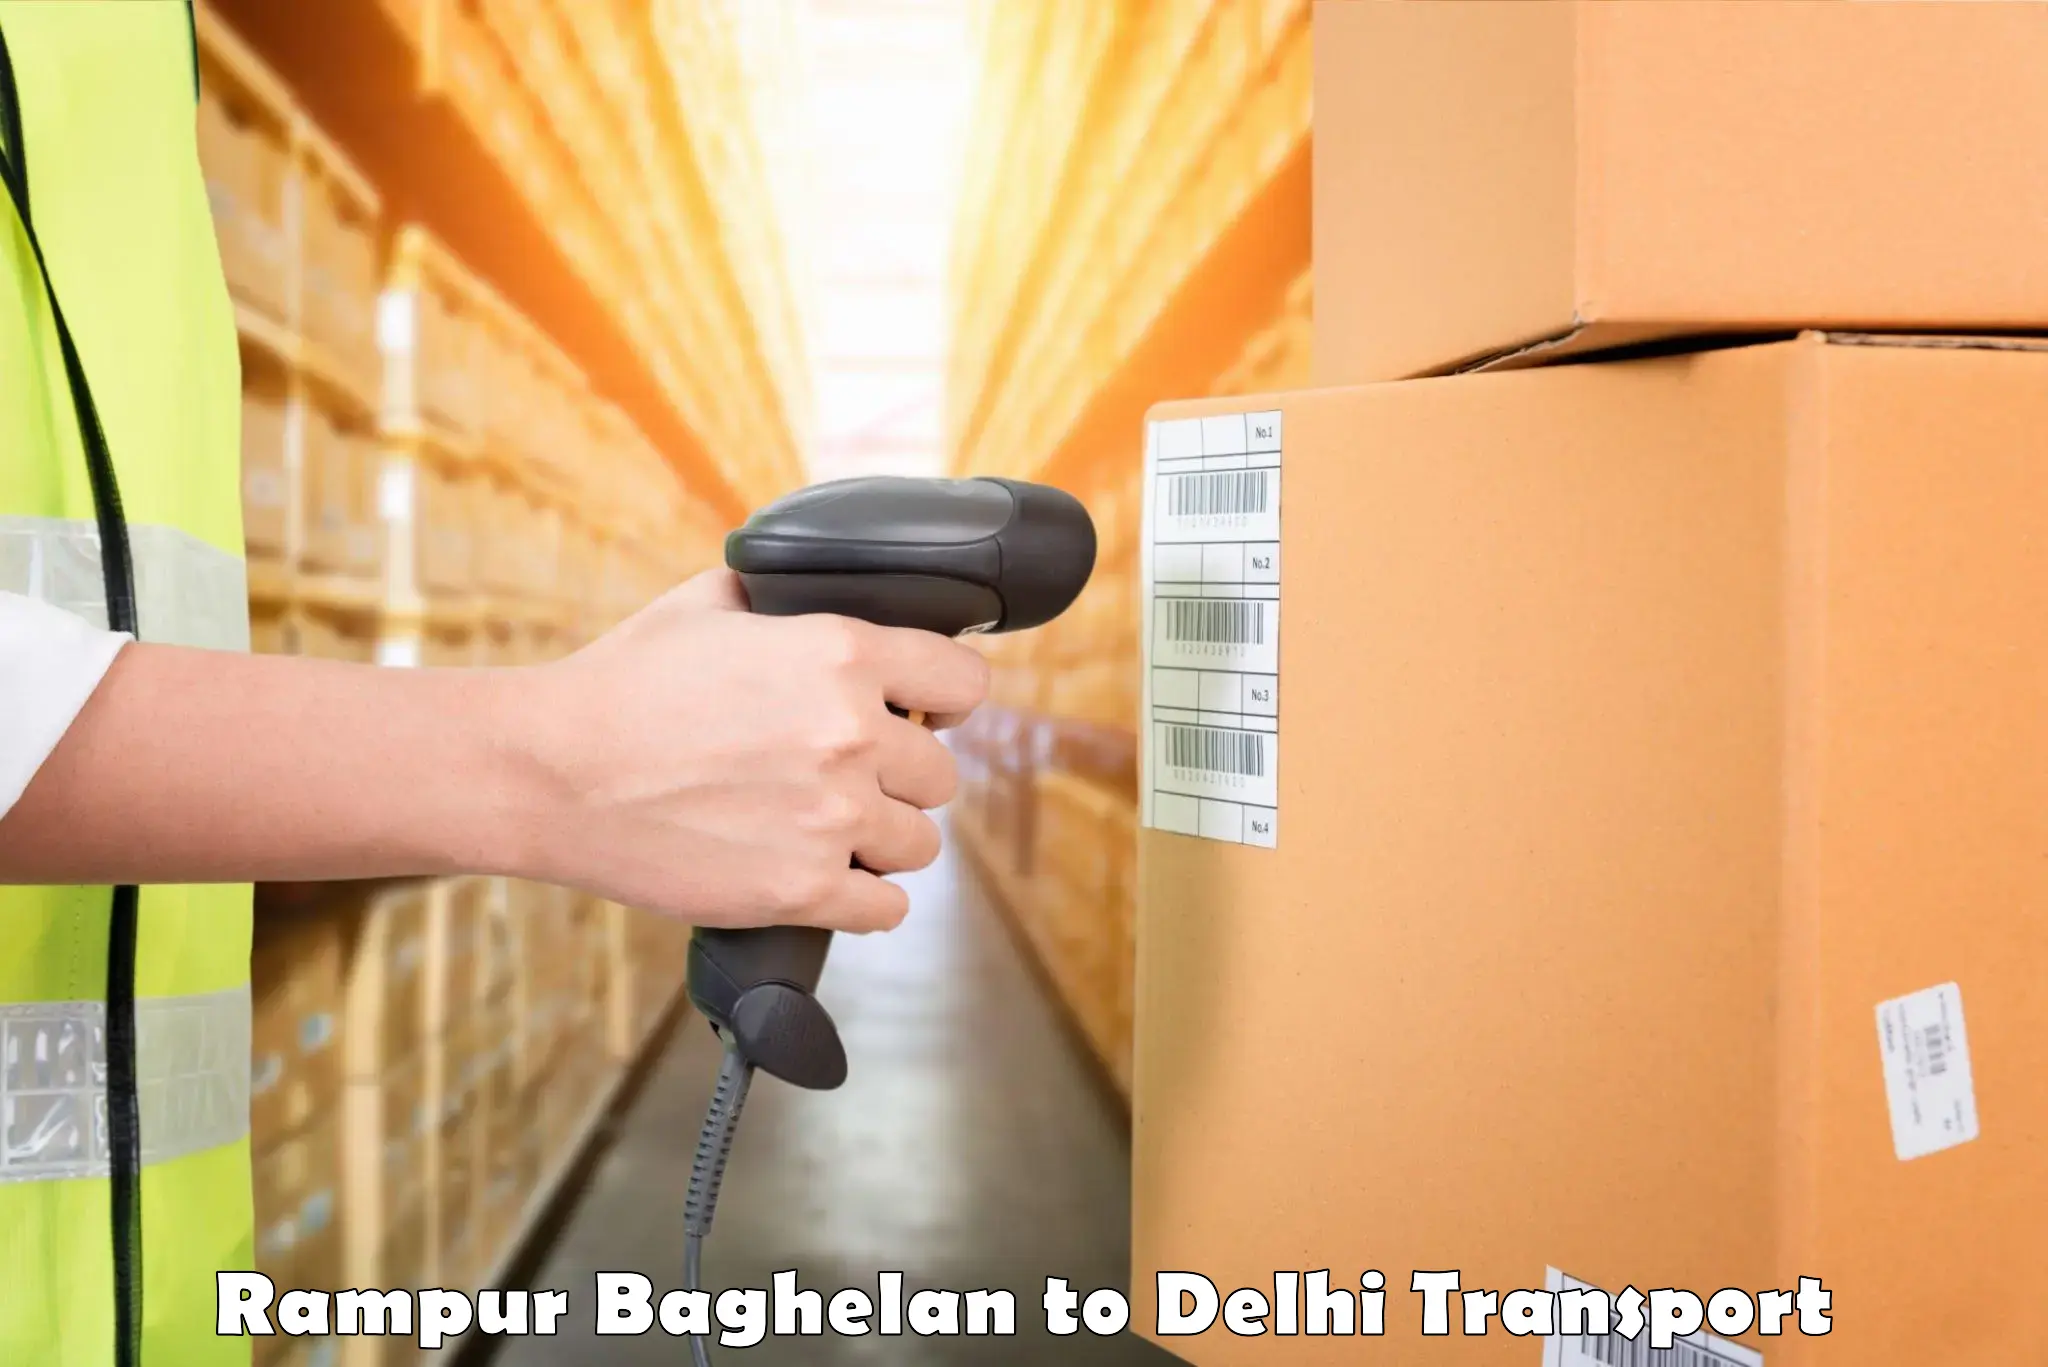 Daily transport service Rampur Baghelan to East Delhi